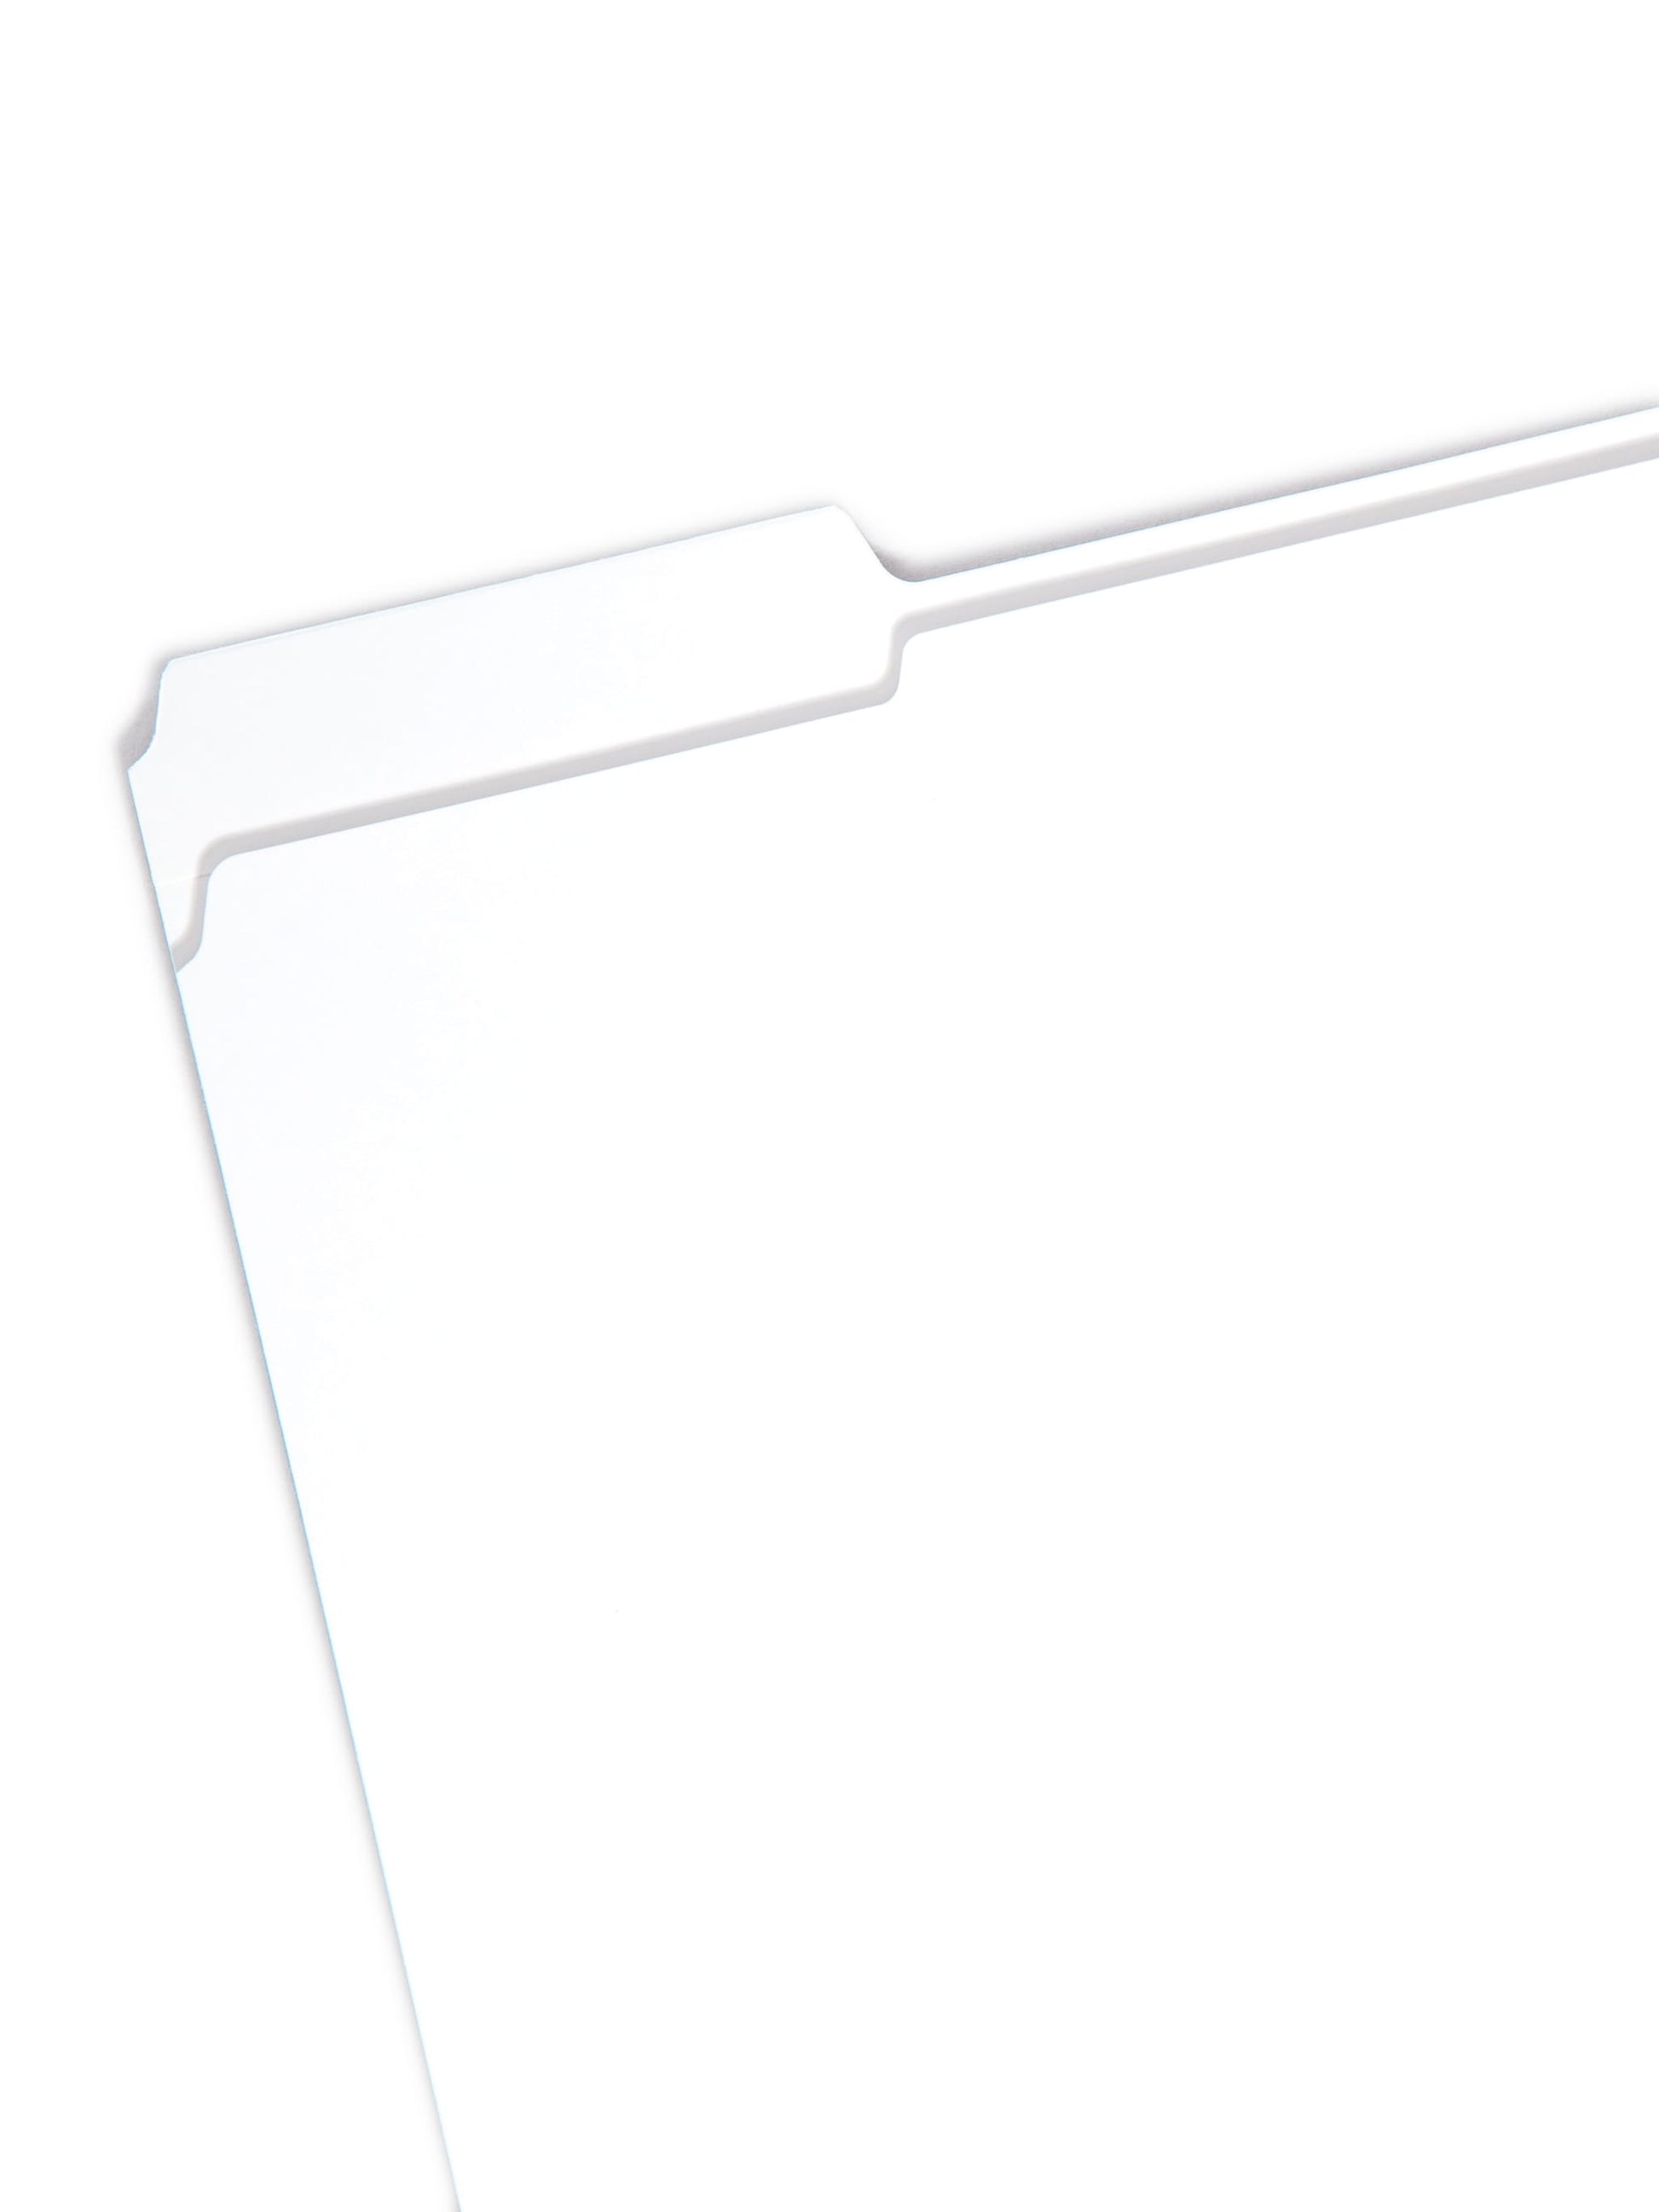 Reinforced Tab File Folders, 1/3-Cut Tab, White Color, Letter Size, Set of 100, 086486128346